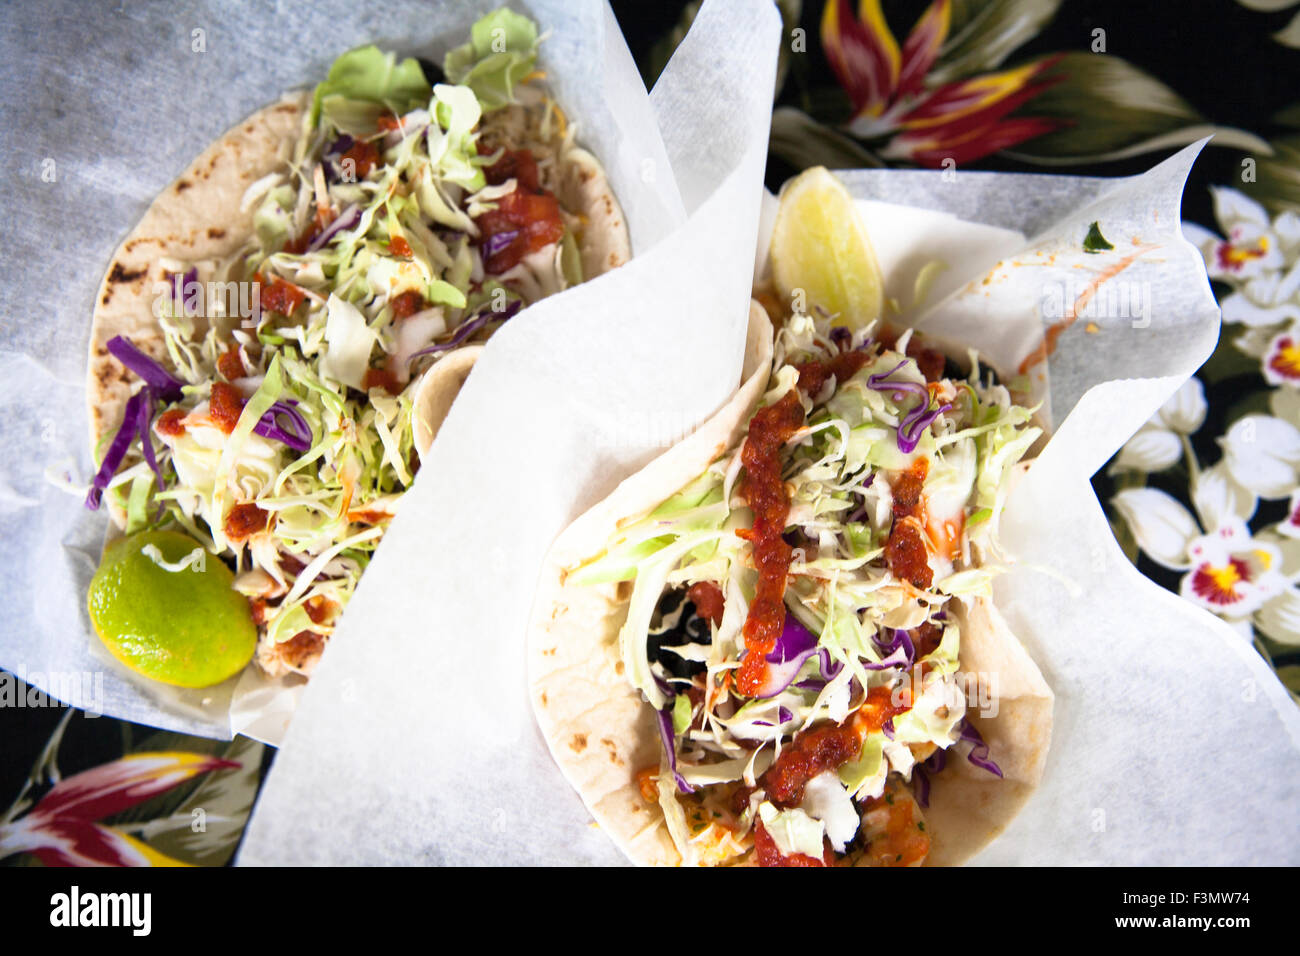 Two shrimp tacos from a roadside stand. Stock Photo